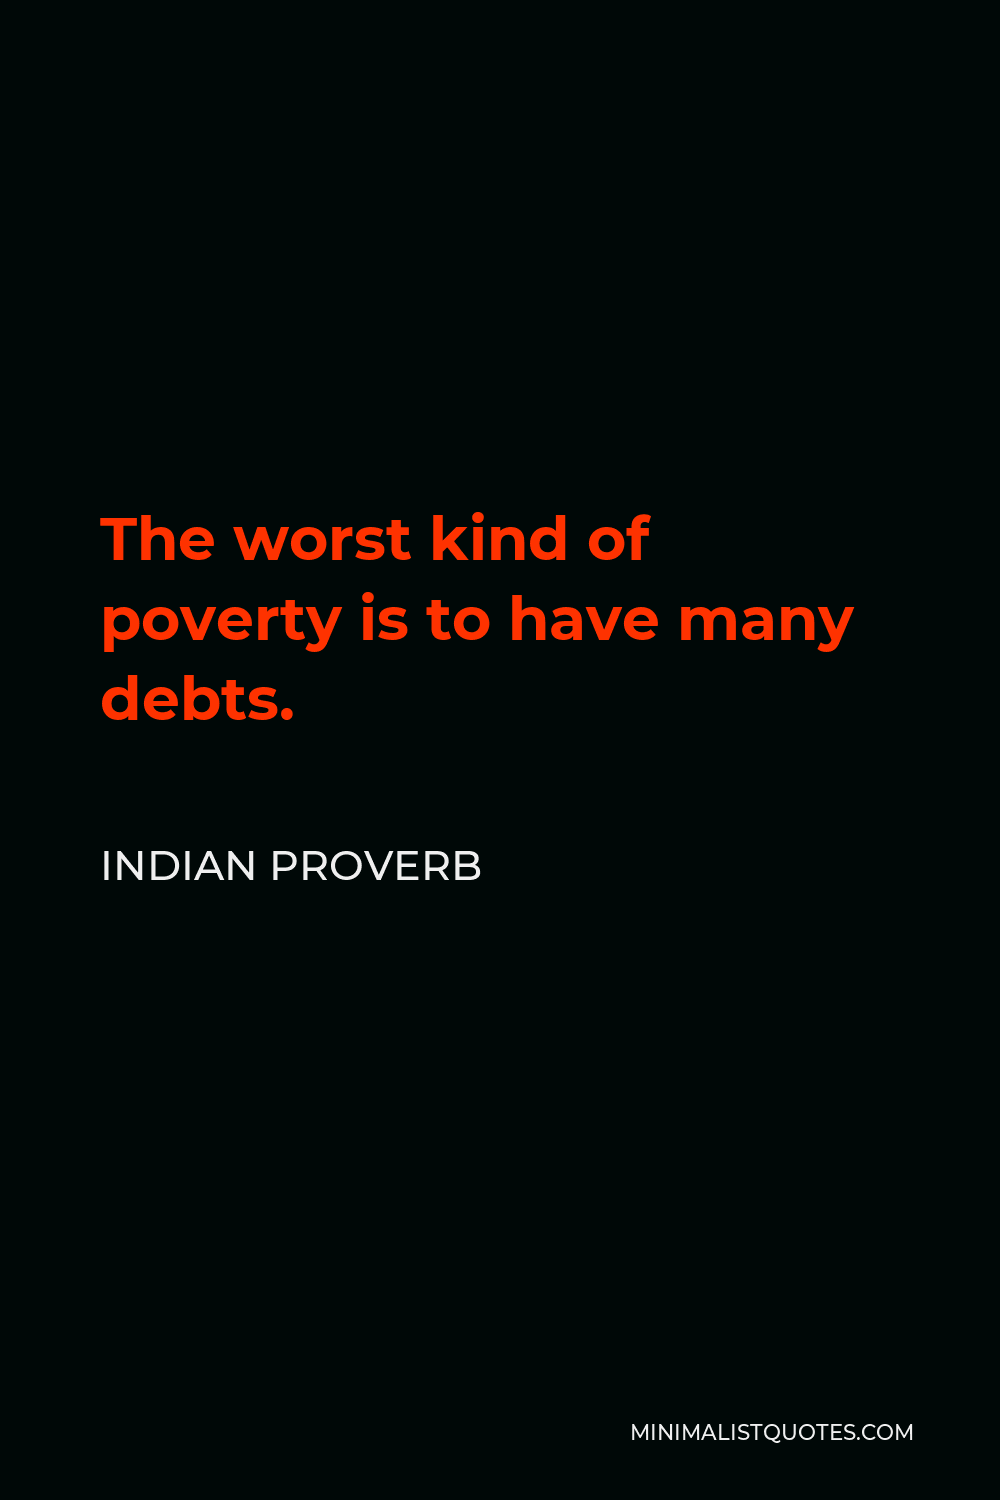 Indian Proverb Quote - The worst kind of poverty is to have many debts.